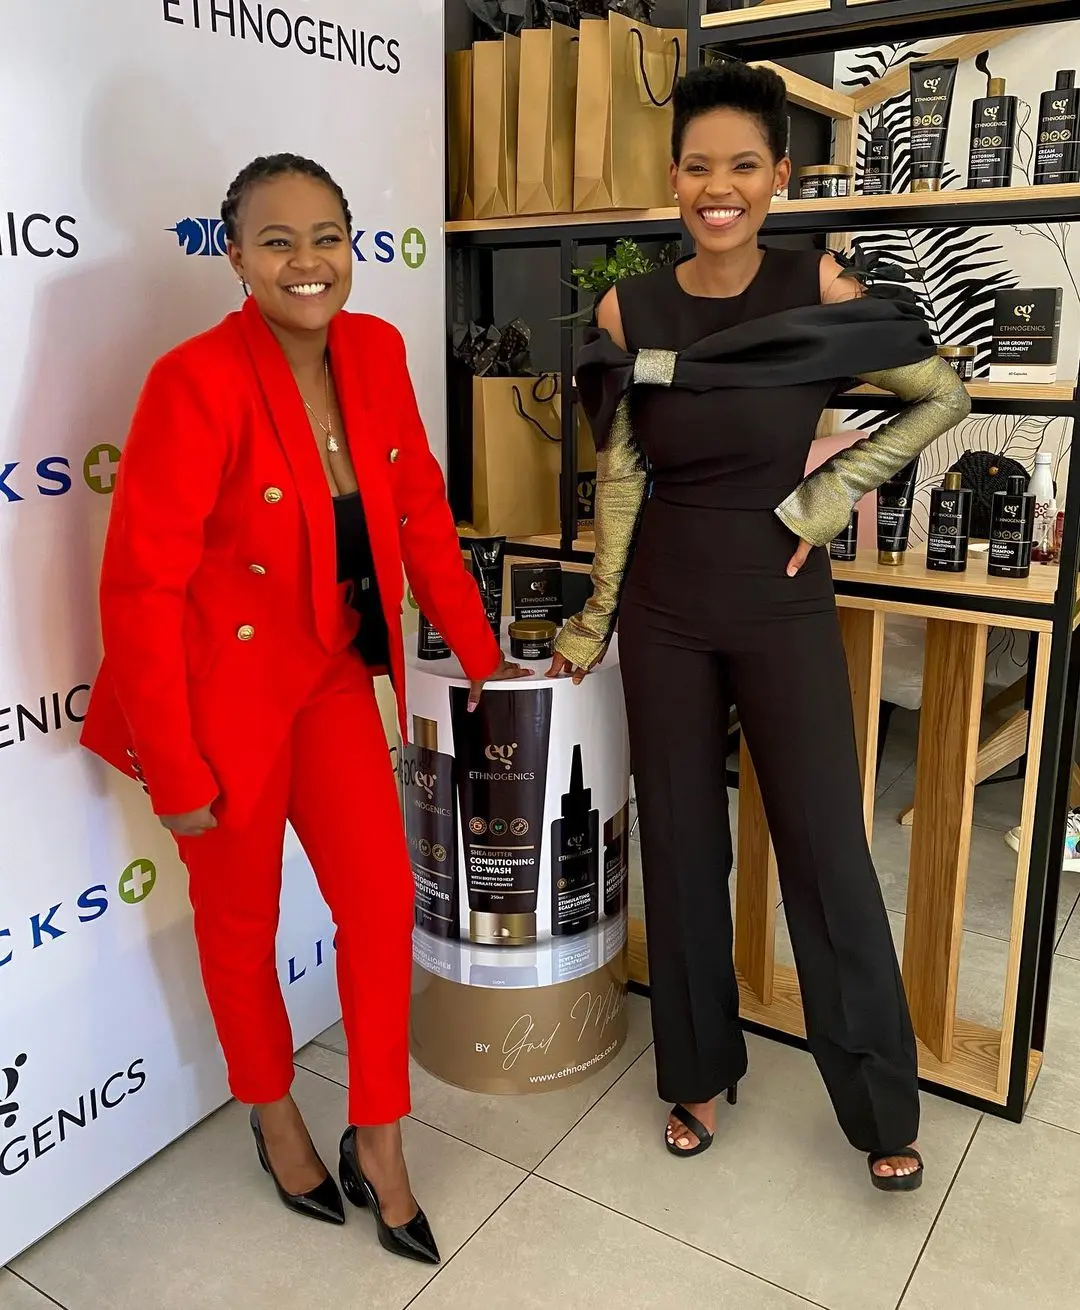 Gail Mabalane introduces her own brand of hair care line named Ethnogenics